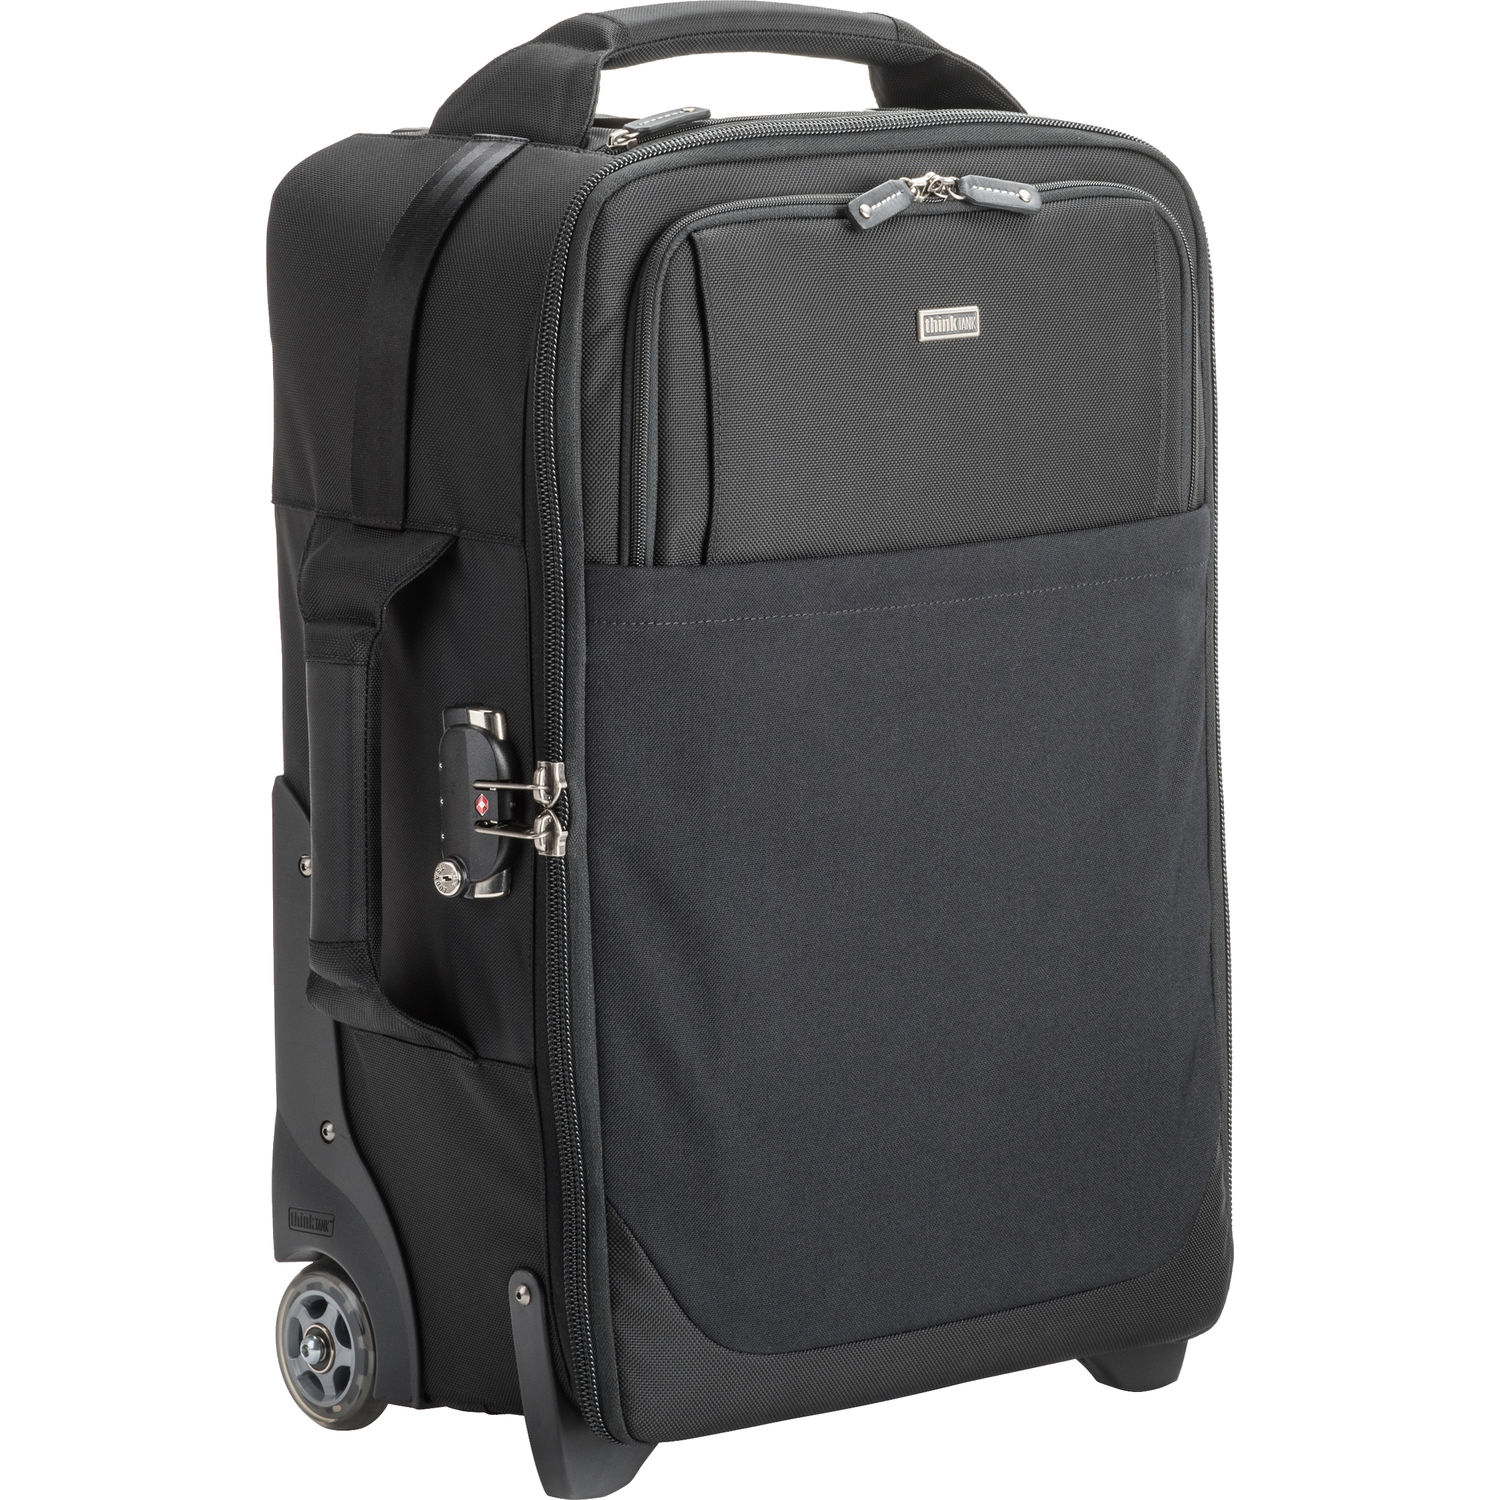 Think Tank Airport Security V3.0 Roller Case